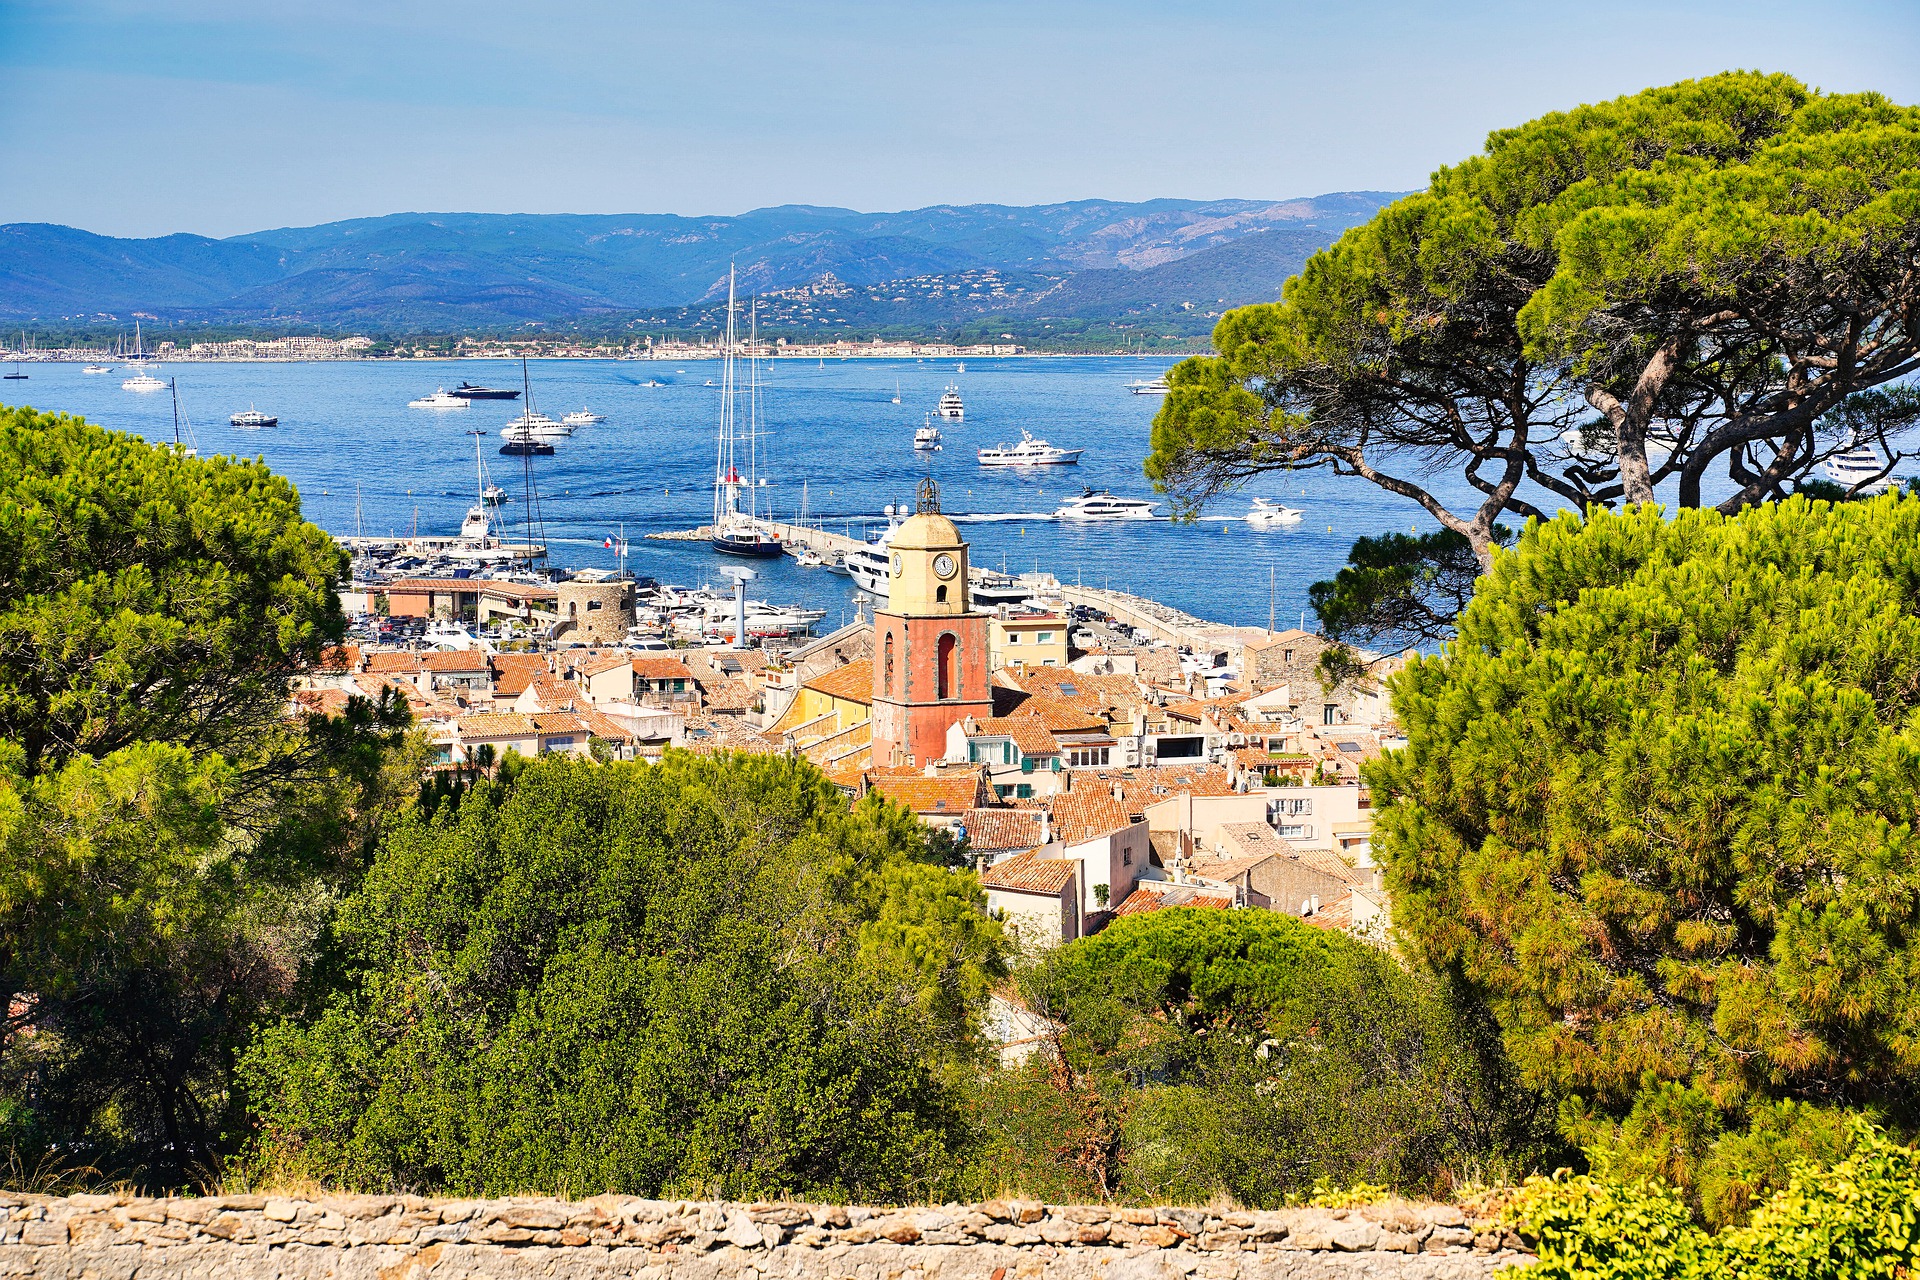 A view of St. Tropez and the Mediterranean Sea